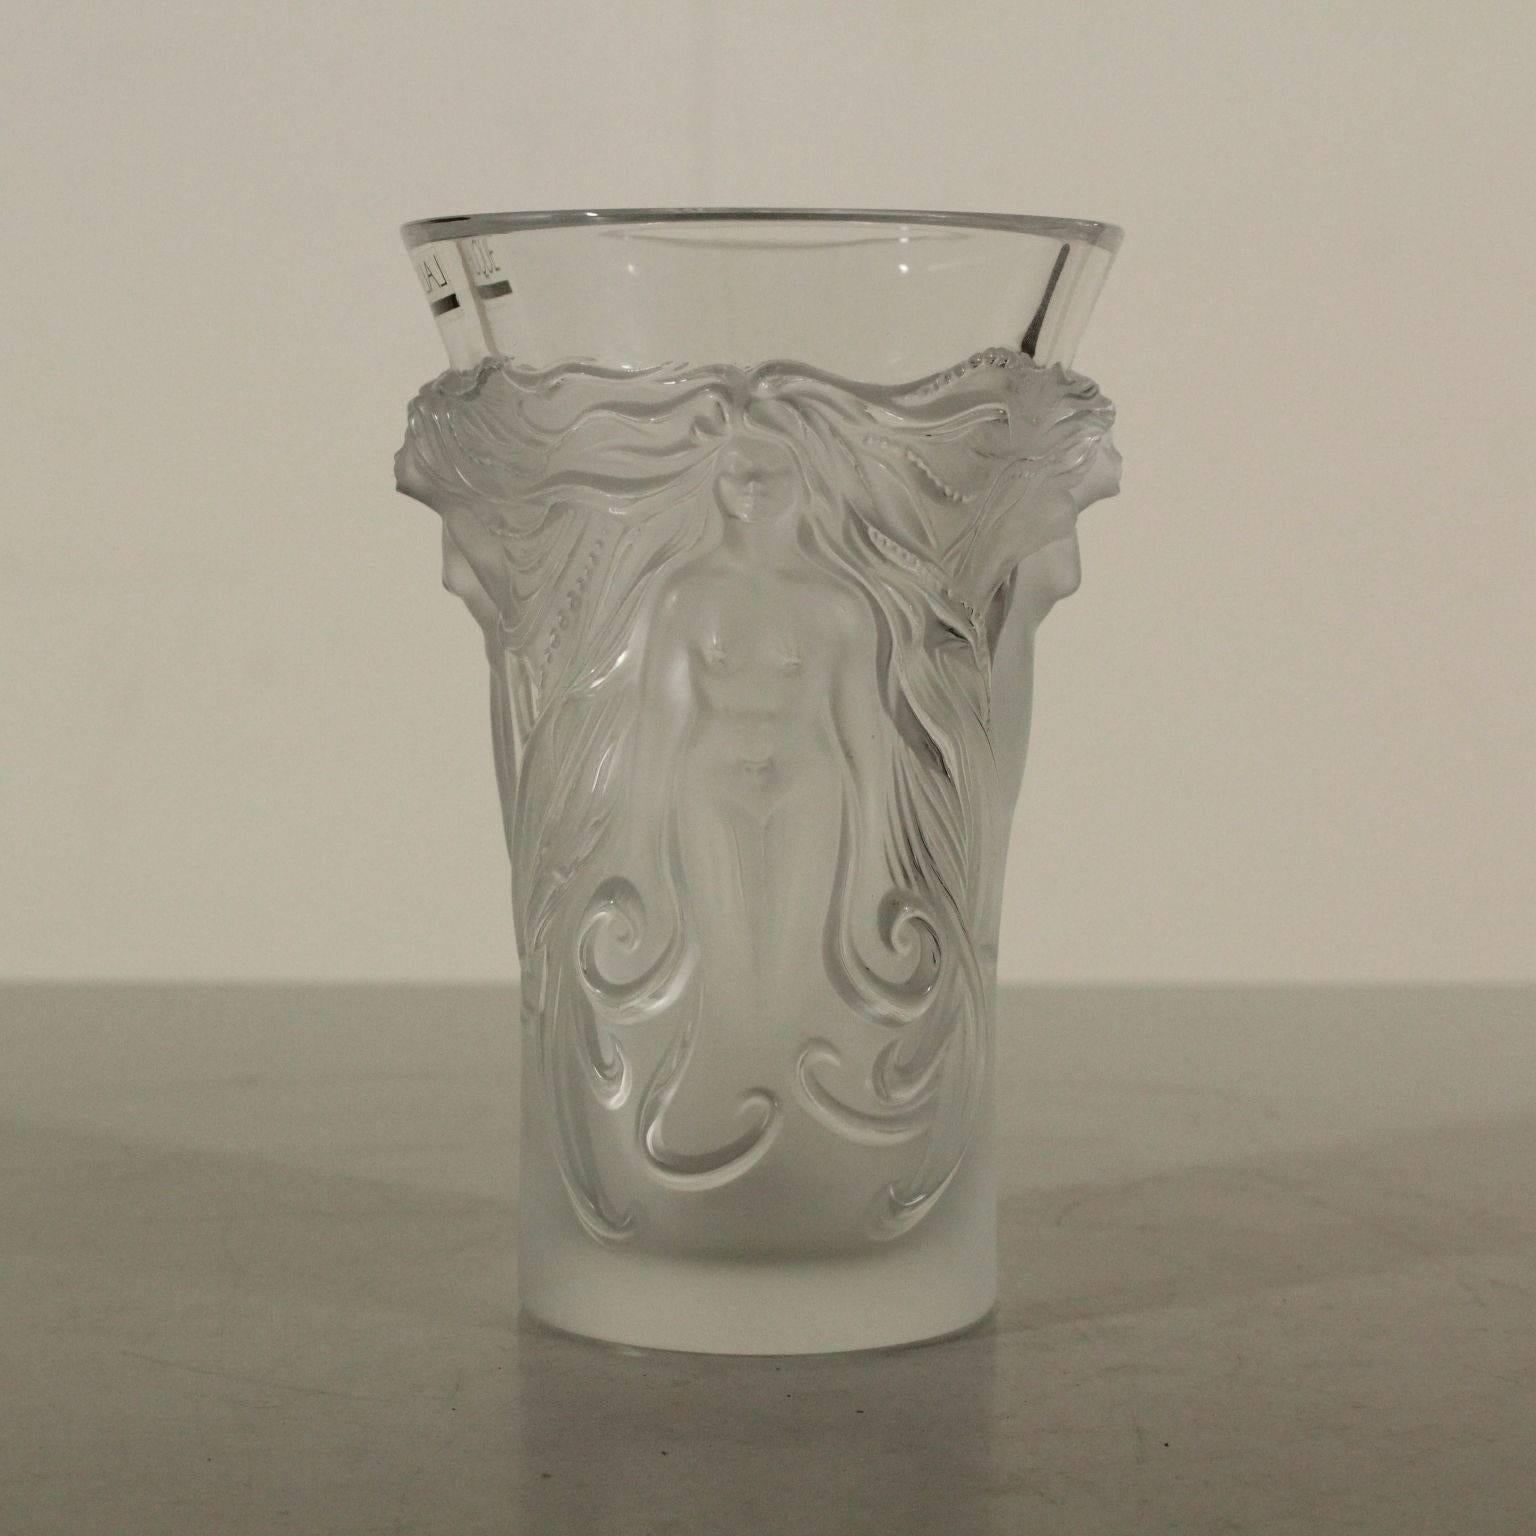 A crystal vase by Lalique with all-round relief decoration, depicting nymphs. Original label on the edge and manufacturer's signature underneath the base. Manufactured in Paris, France, second half of the 20th century.